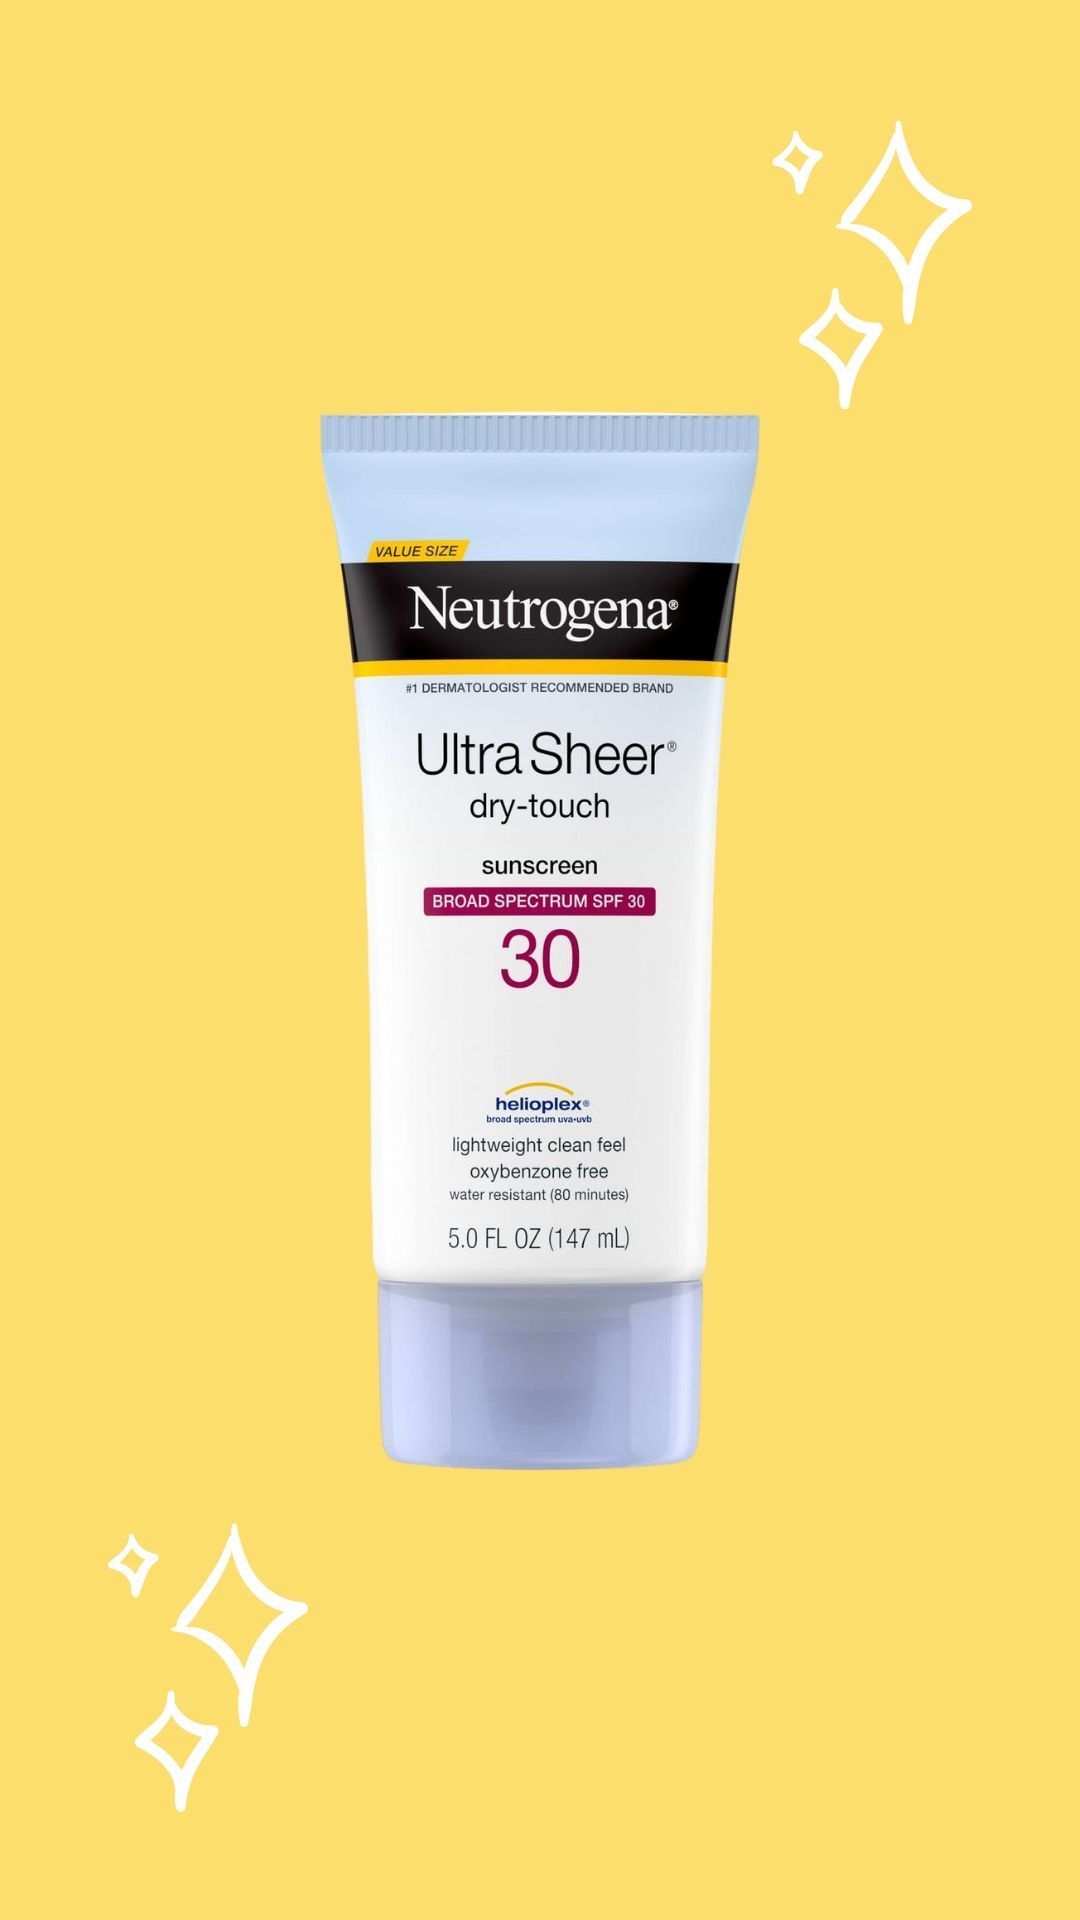 Neutrogena Ultra Sheer Dry Touch Sunscreen, yellow background with sparkles